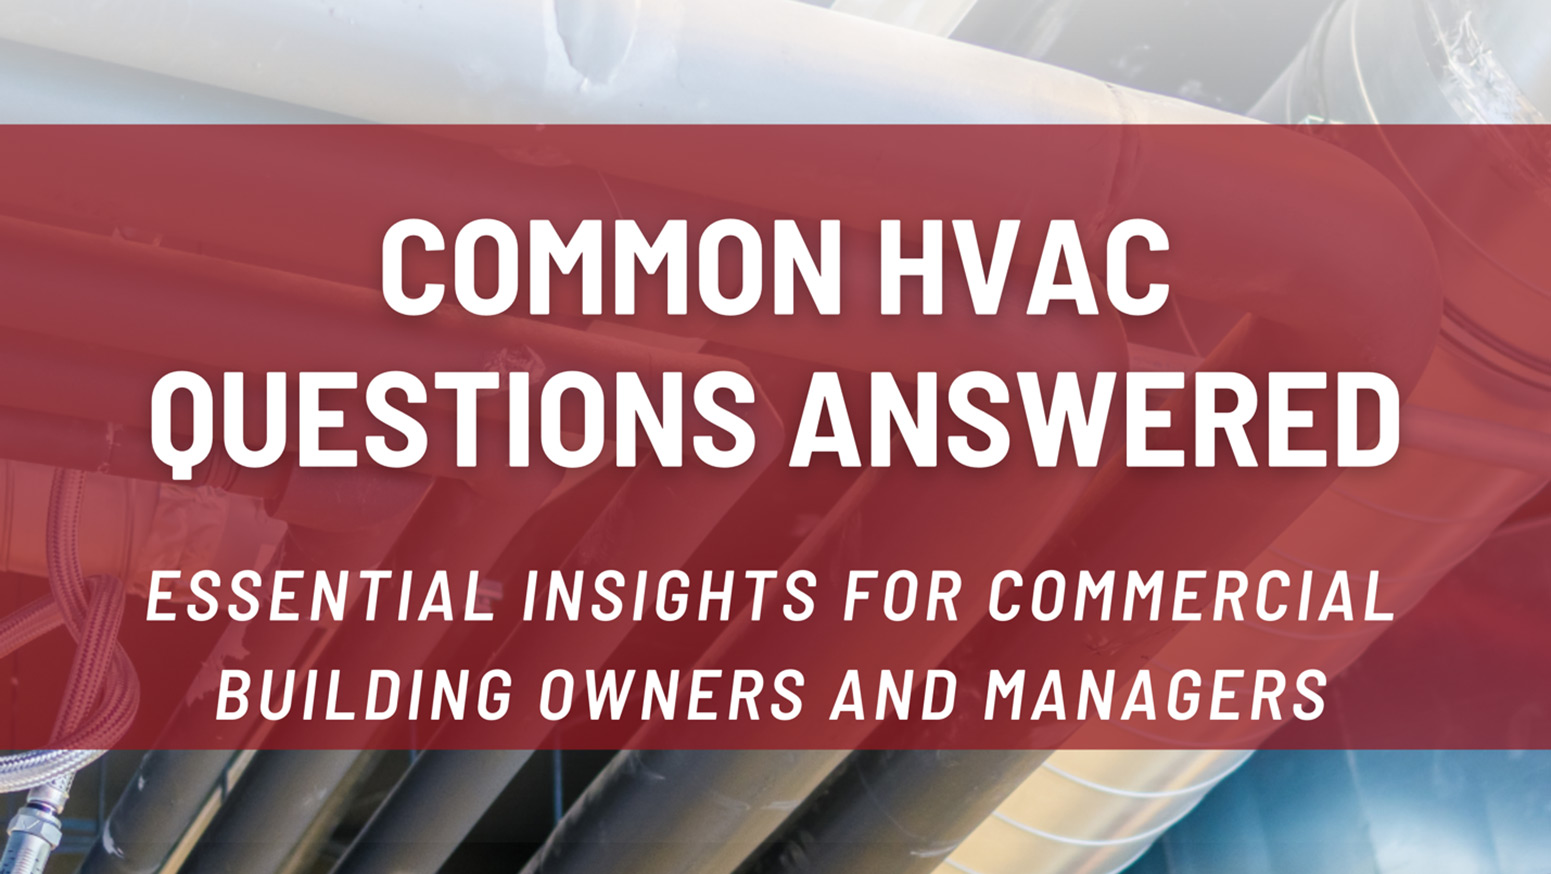 Common HVAC Questions Answered: Essential Insights for Commercial Building Owners and Managers